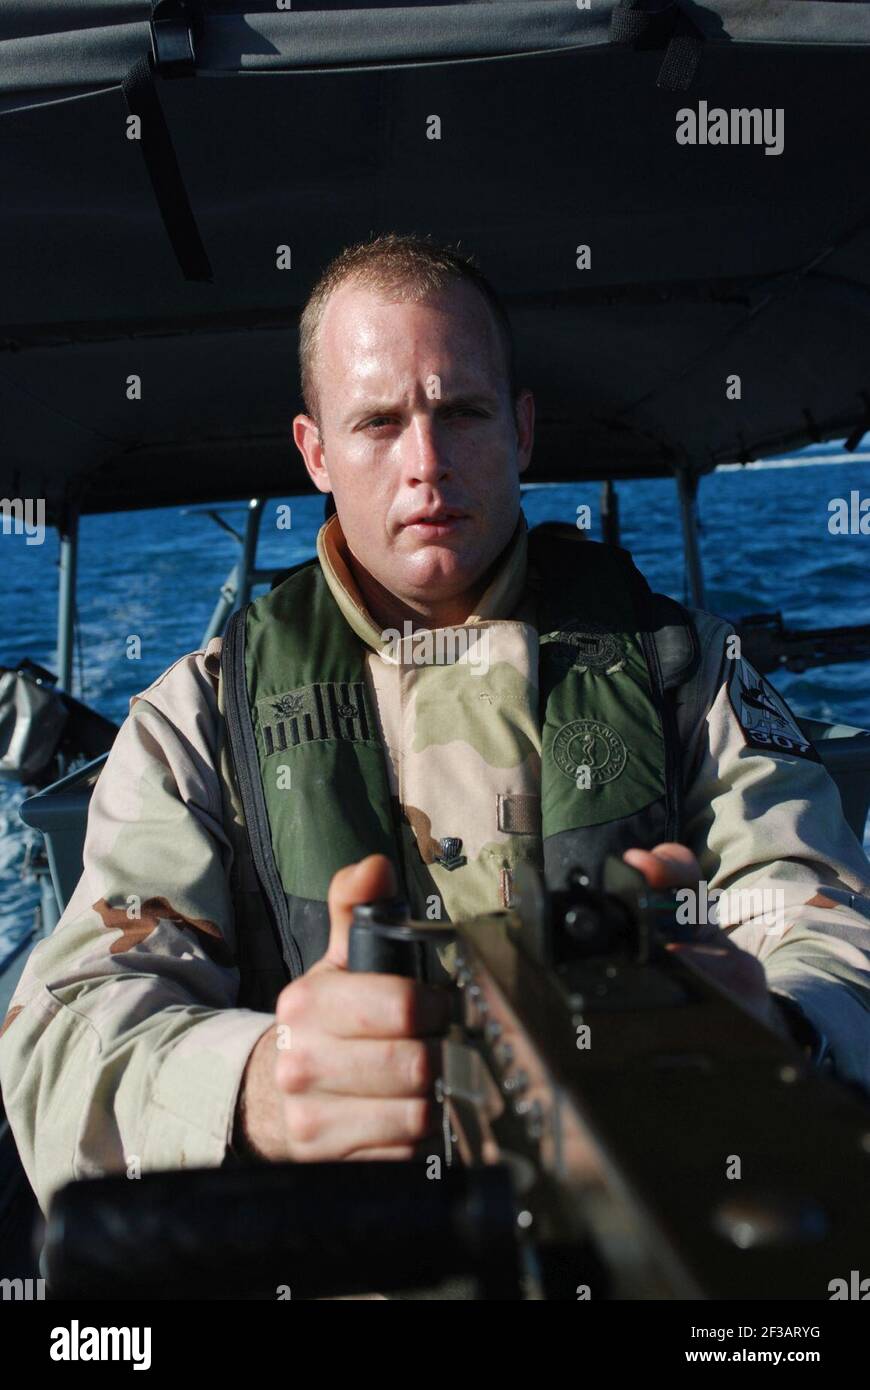 Petty Officer 3rd Class John Ebert, coast guard, from Port Security Unit 307 out of Clearwater, Fla., mans a .50 caliber machine gun during a patrol in Guantanamo Bay, June 10. PSU 307 provides maritime anti-terrorism and force protection for the waters in and around U.S. Naval Station Guantanamo Bay and Joint Task Force Guantanamo. JTF Guantanamo conducts safe and humane care and custody of detained enemy combatants. The JTF conducts interrogation operations to collect strategic intelligence in support of the Global War on Terror and supports law enforcement and war crimes investigations. JTF Stock Photo